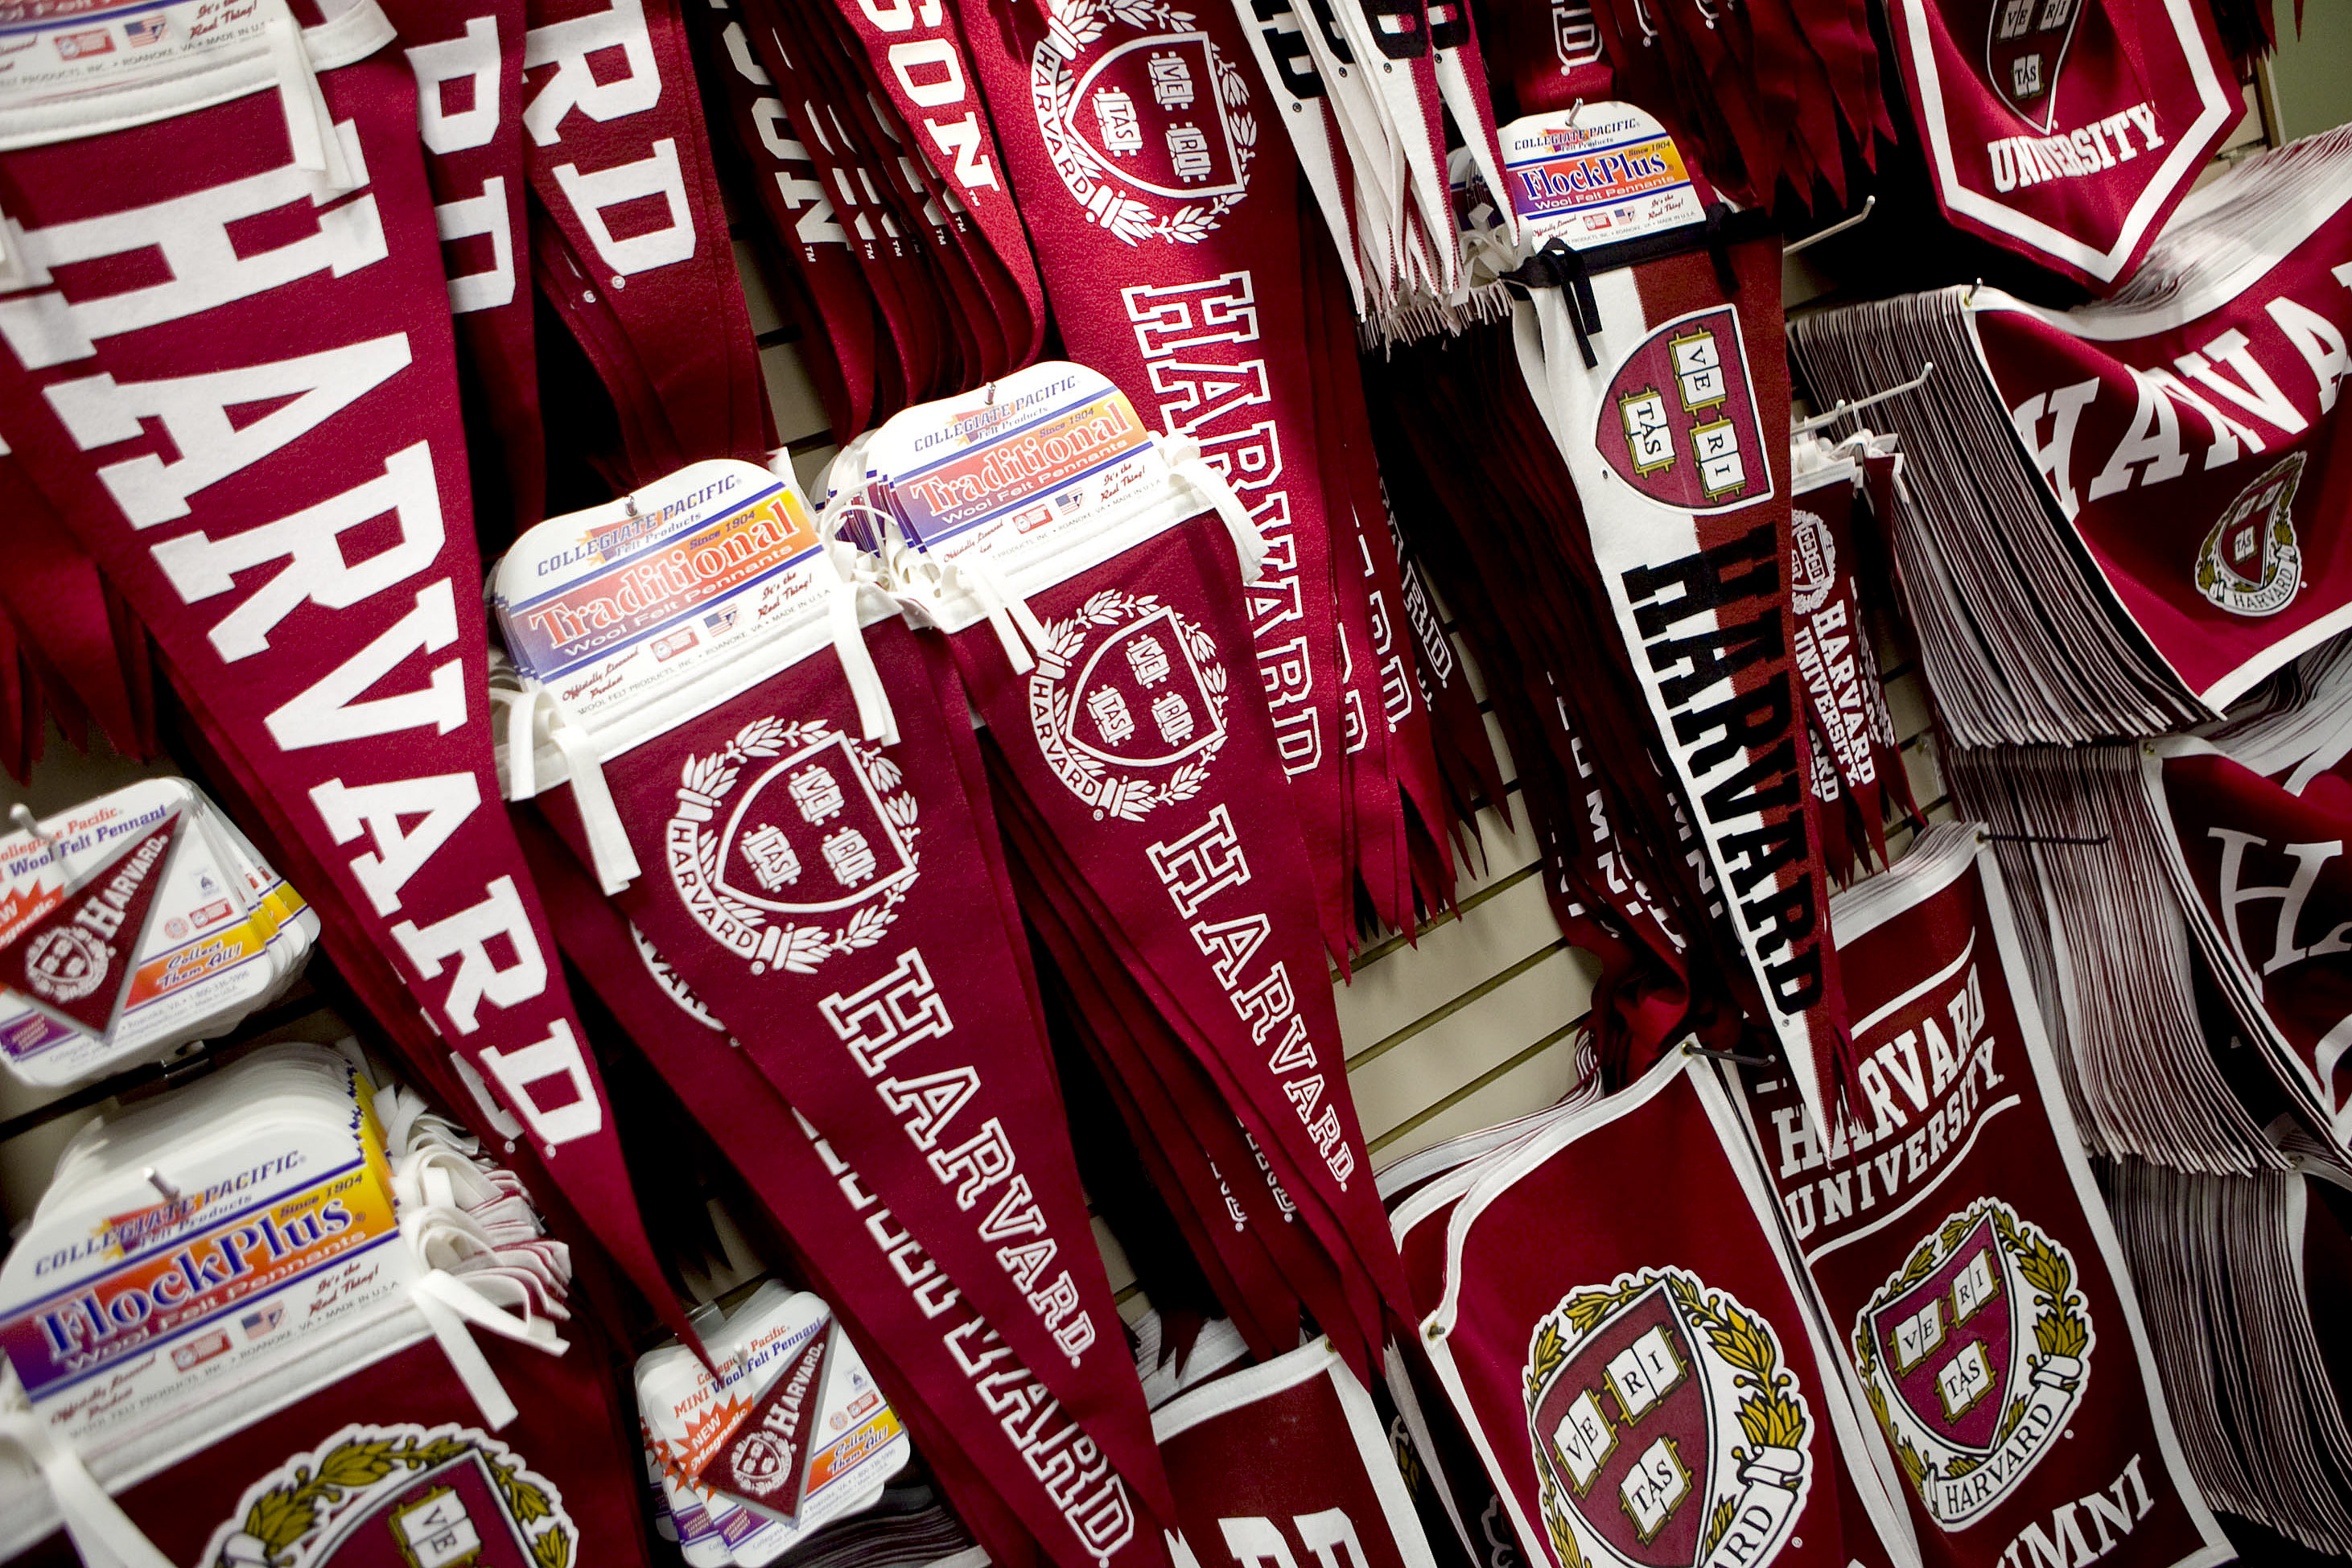 Harvard University pennants sit on sale at the Harvard Cooperative Society in Cambridge, Mass. (Bloomberg/Getty Images)